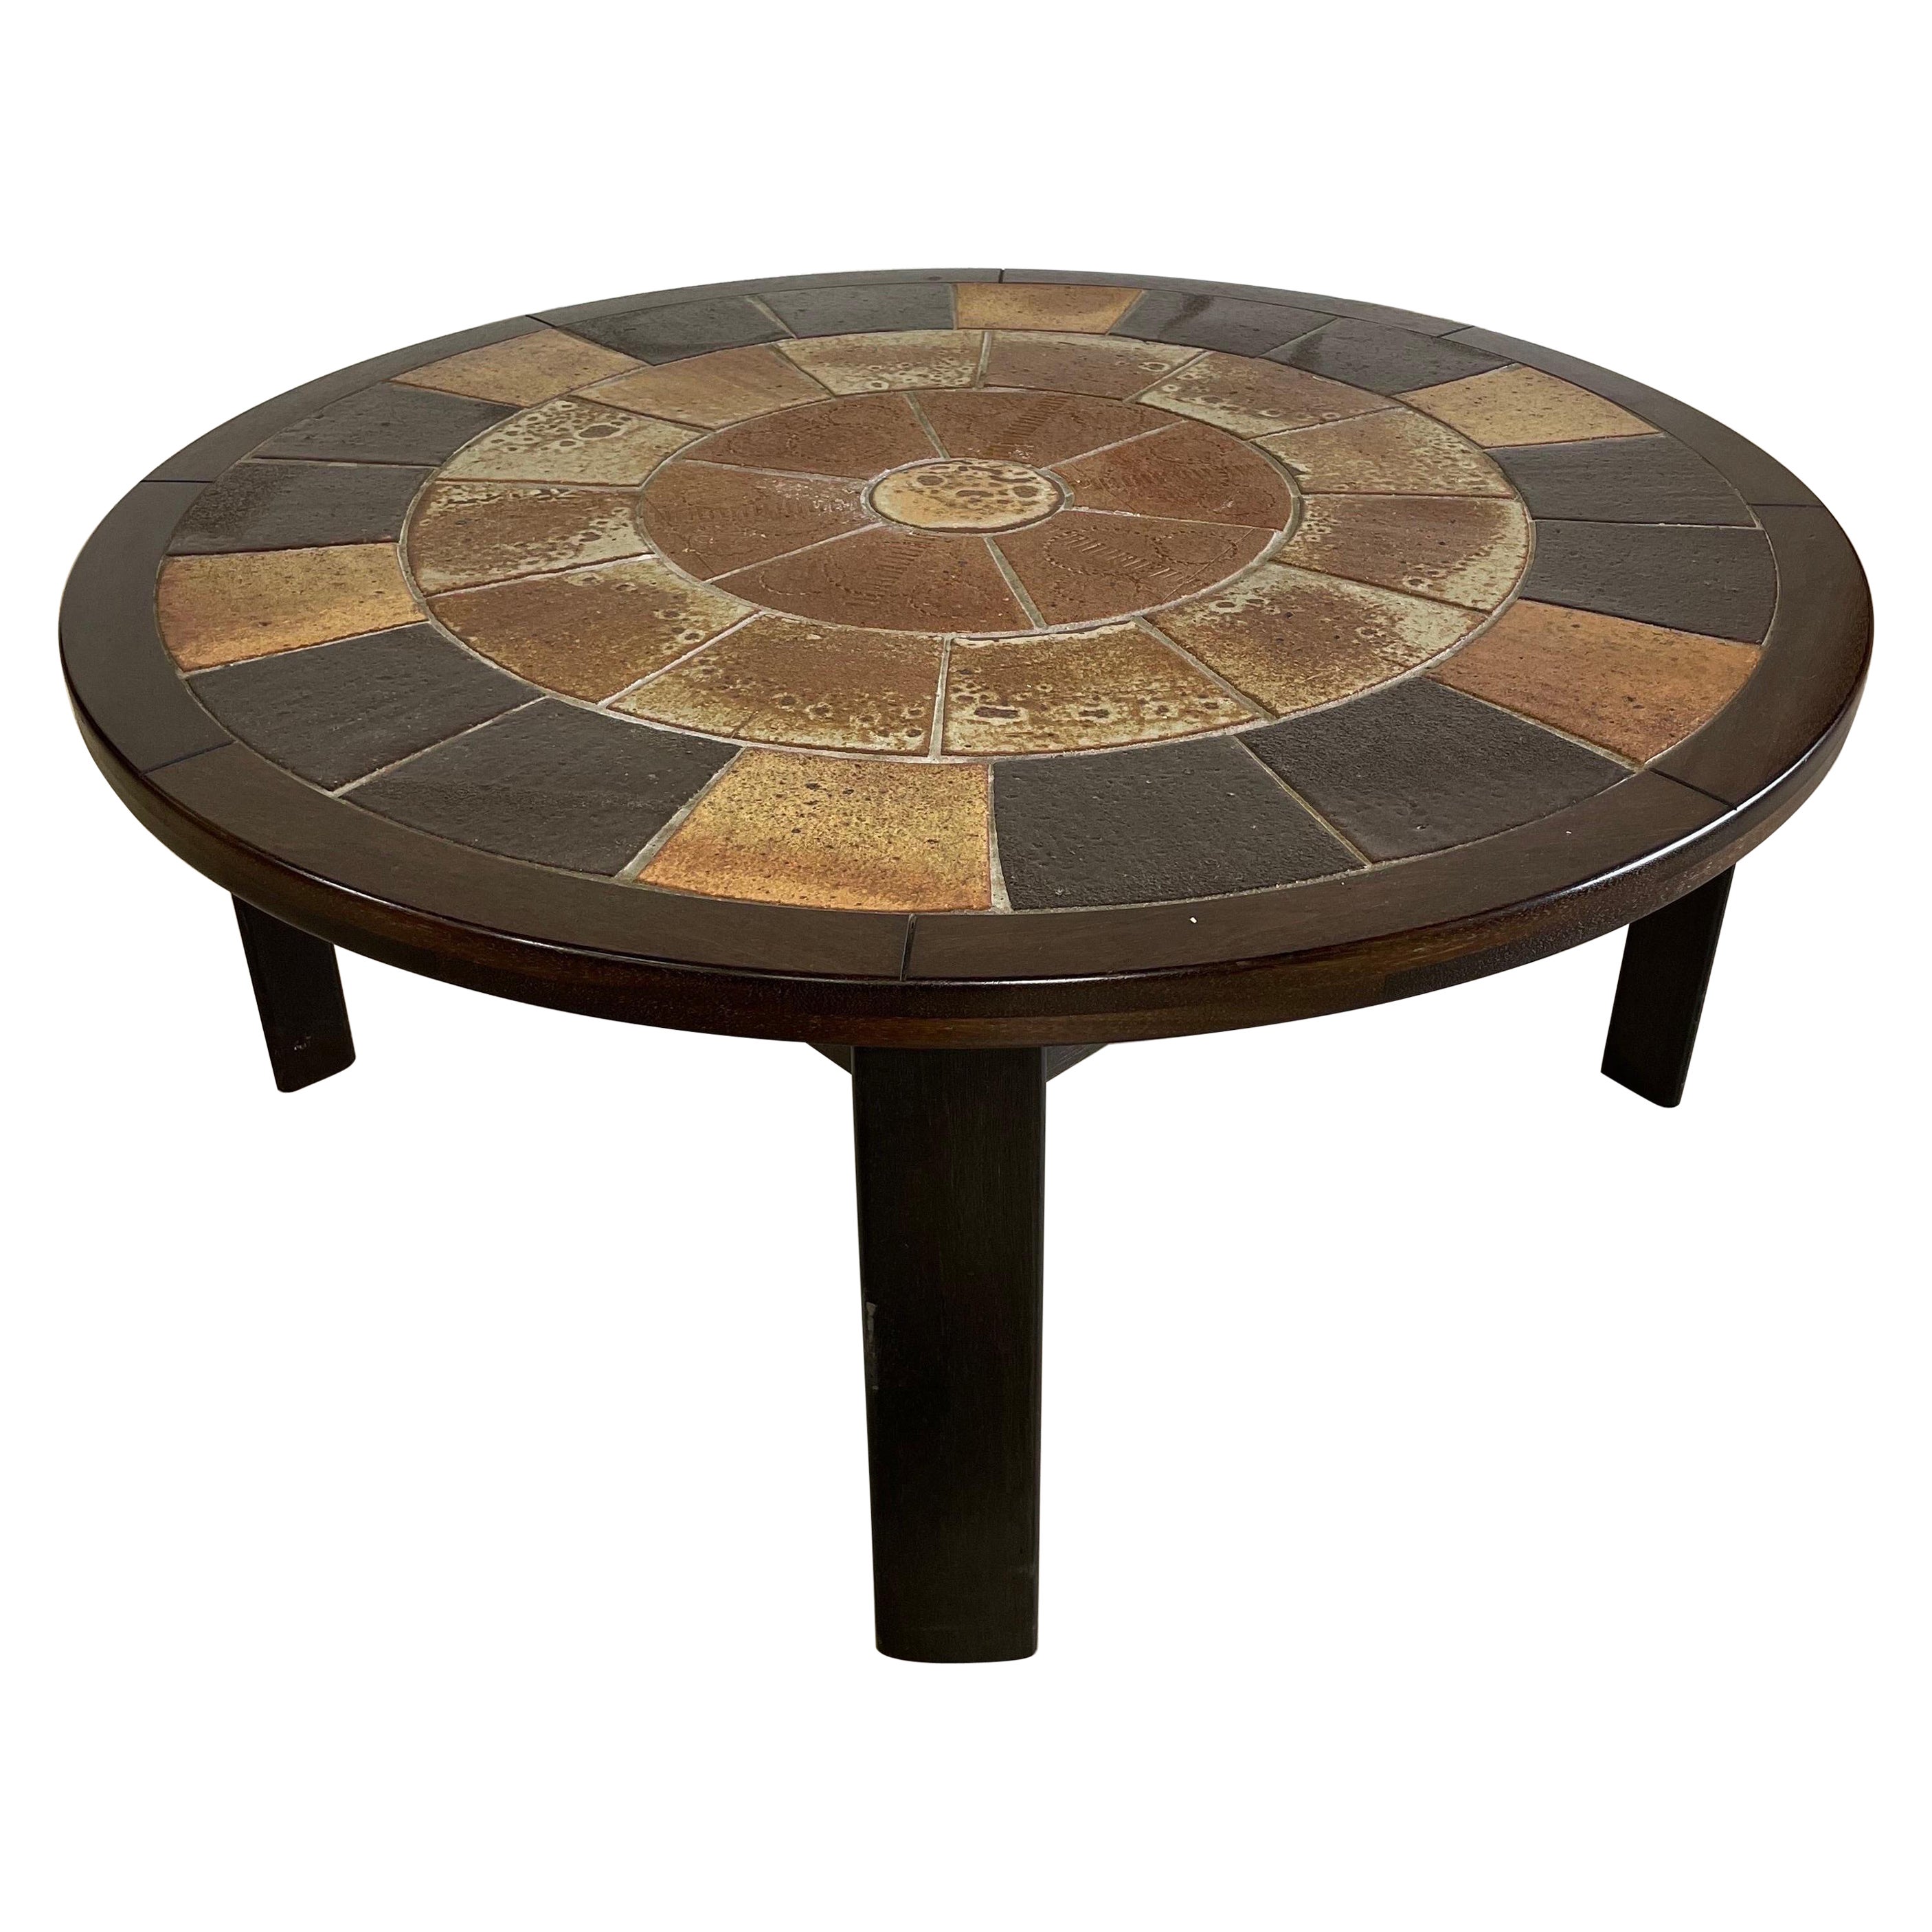 Tue Poulsen for Haslev Møbelsnedkeri Round Tile Top Coffee Table Midcentury